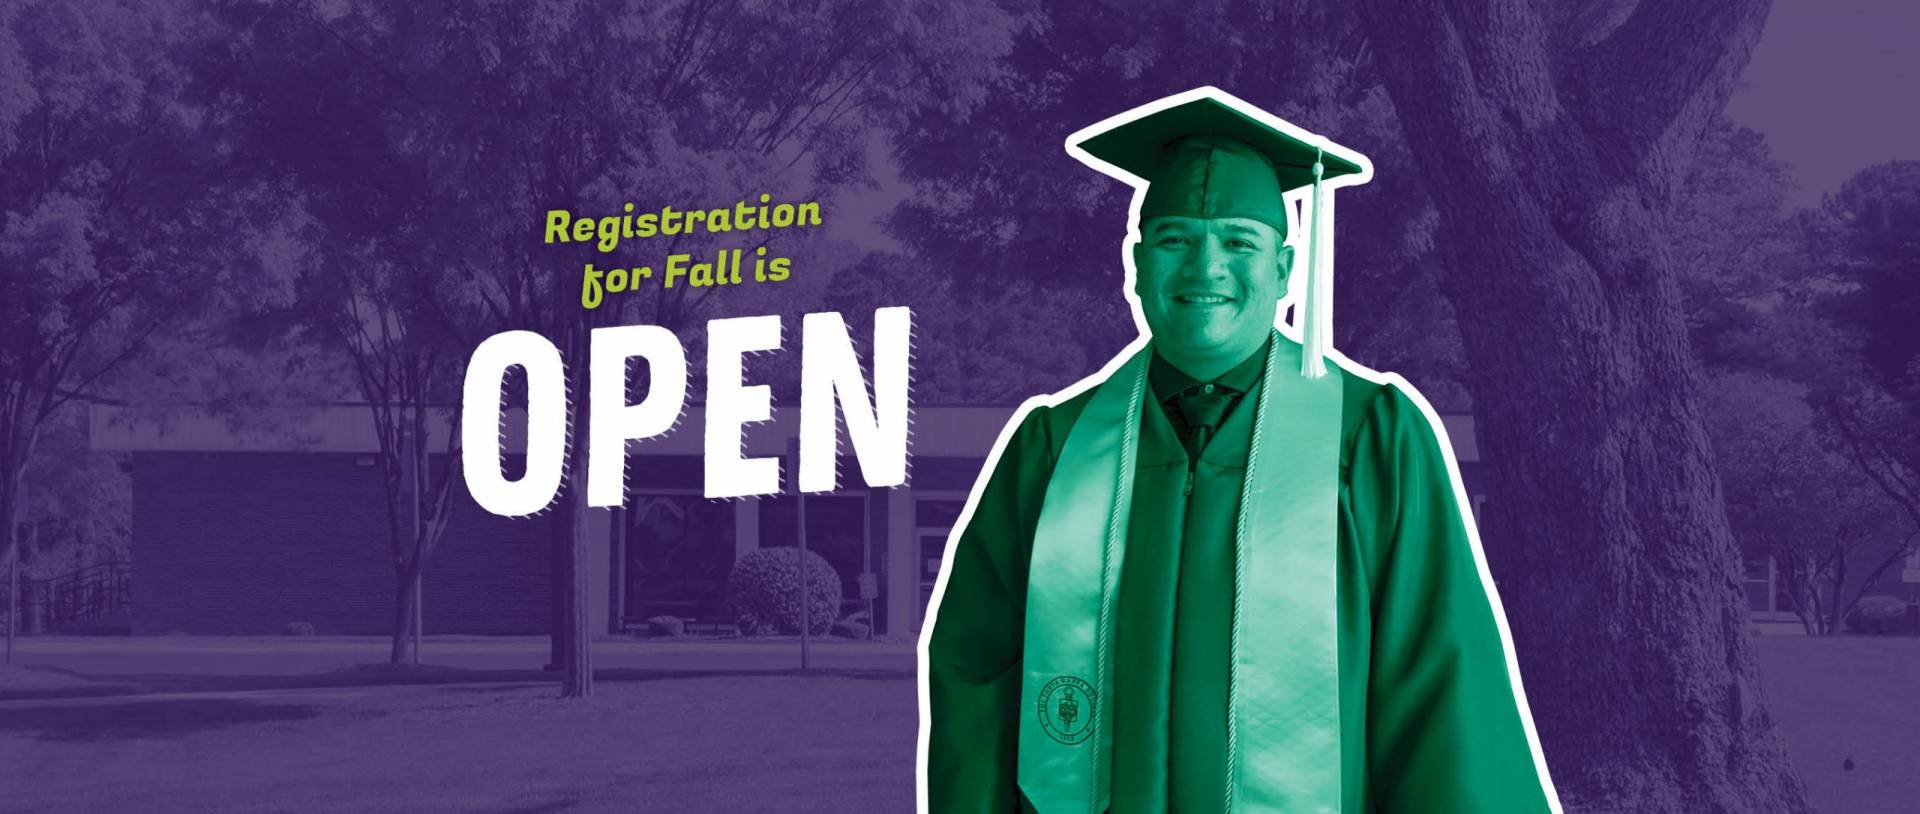 Registration for Fall is Open